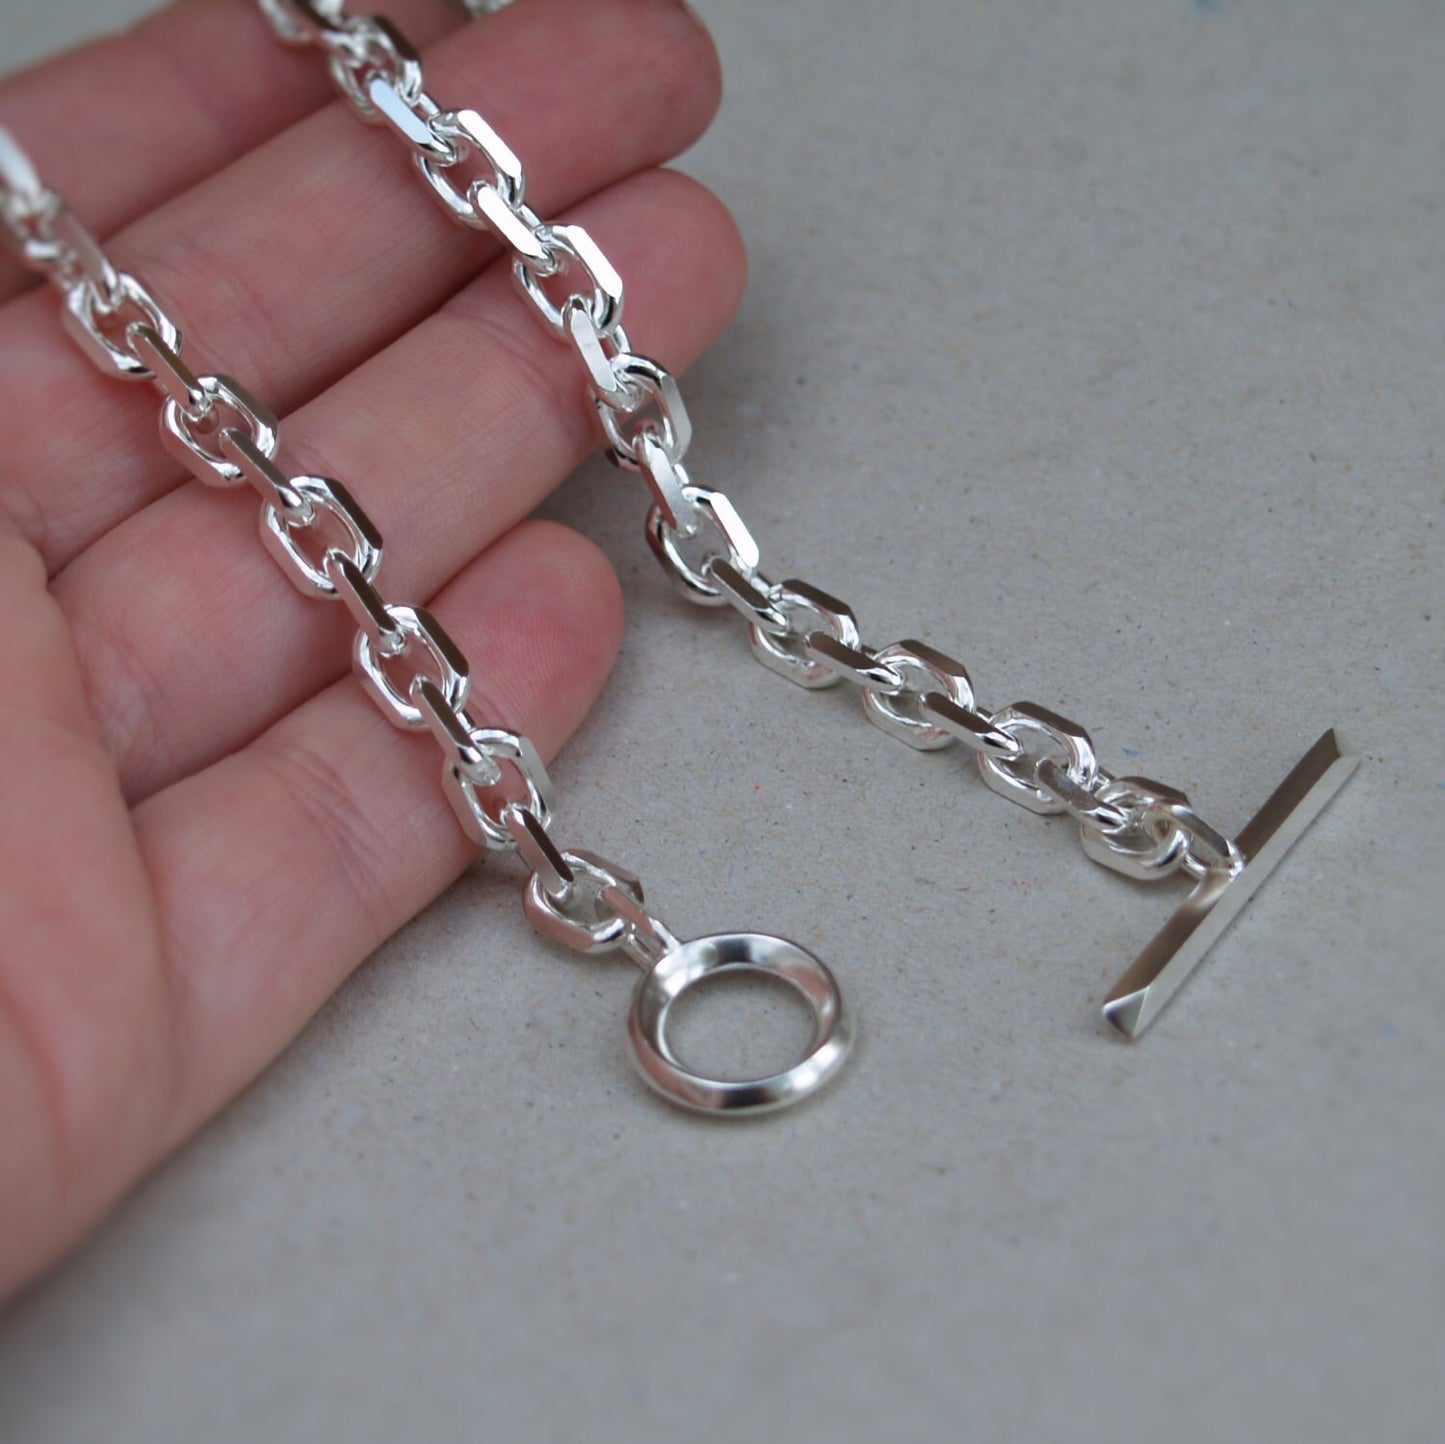 Handmade to order - Oxidised or polished solid silver extra heavy 6.6mm wide diamond cut trace chain with a unique T-bar design